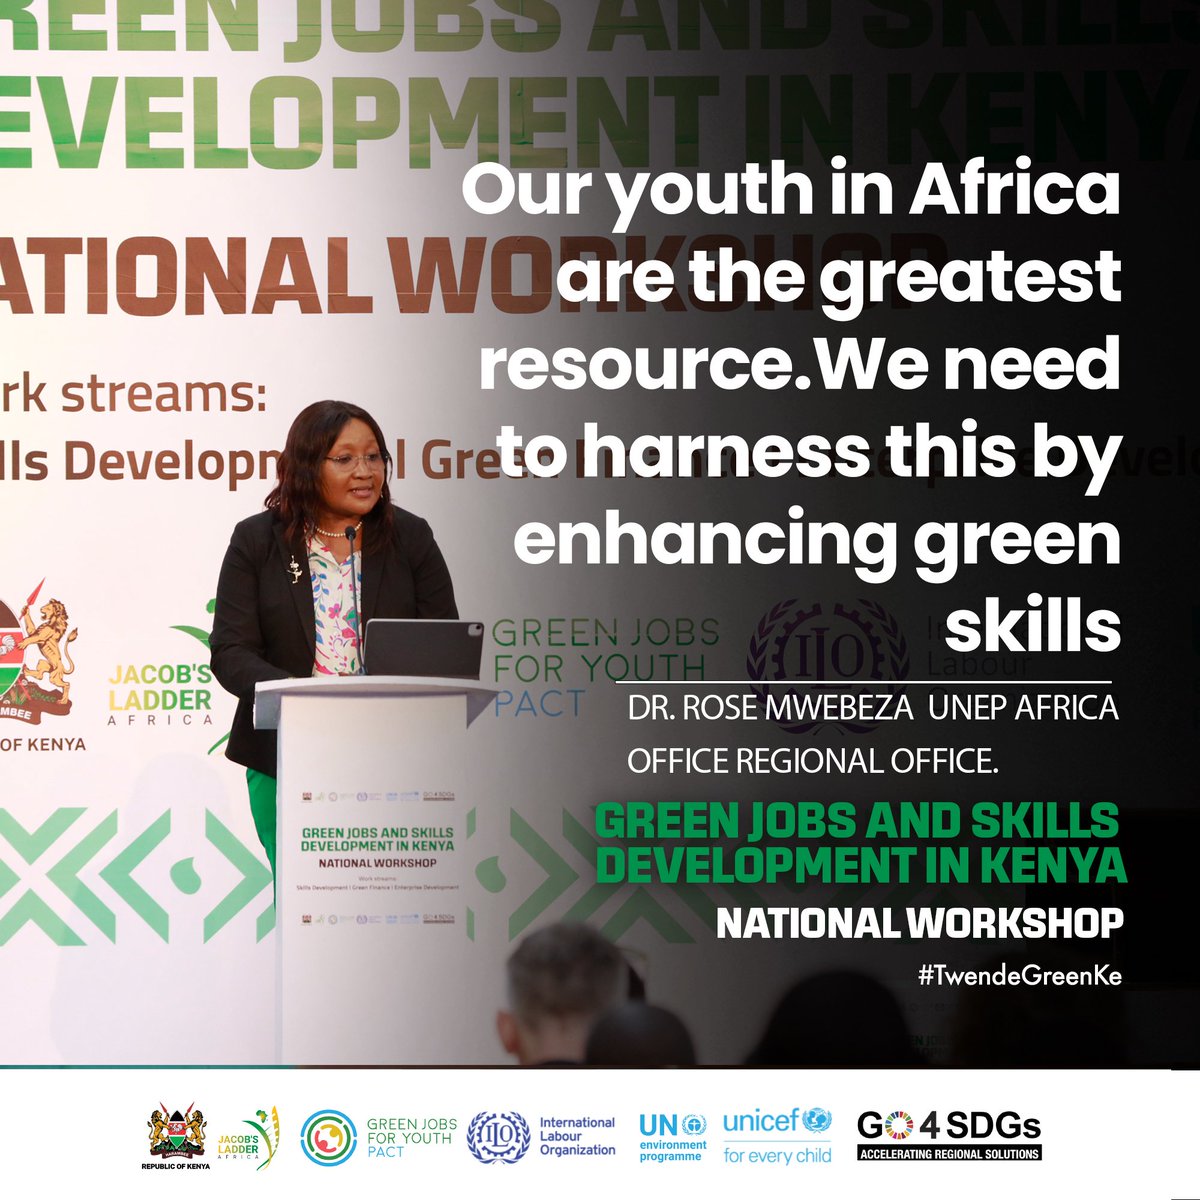 Our youth is Africa and Kenya’s greatest untapped renewable energy! We need to harness this immense demographic dividend, by continuing to work collaboratively to unlock youth driven solutions for the creation of green entrepreneurship opportunities and skillsets that will anchor…